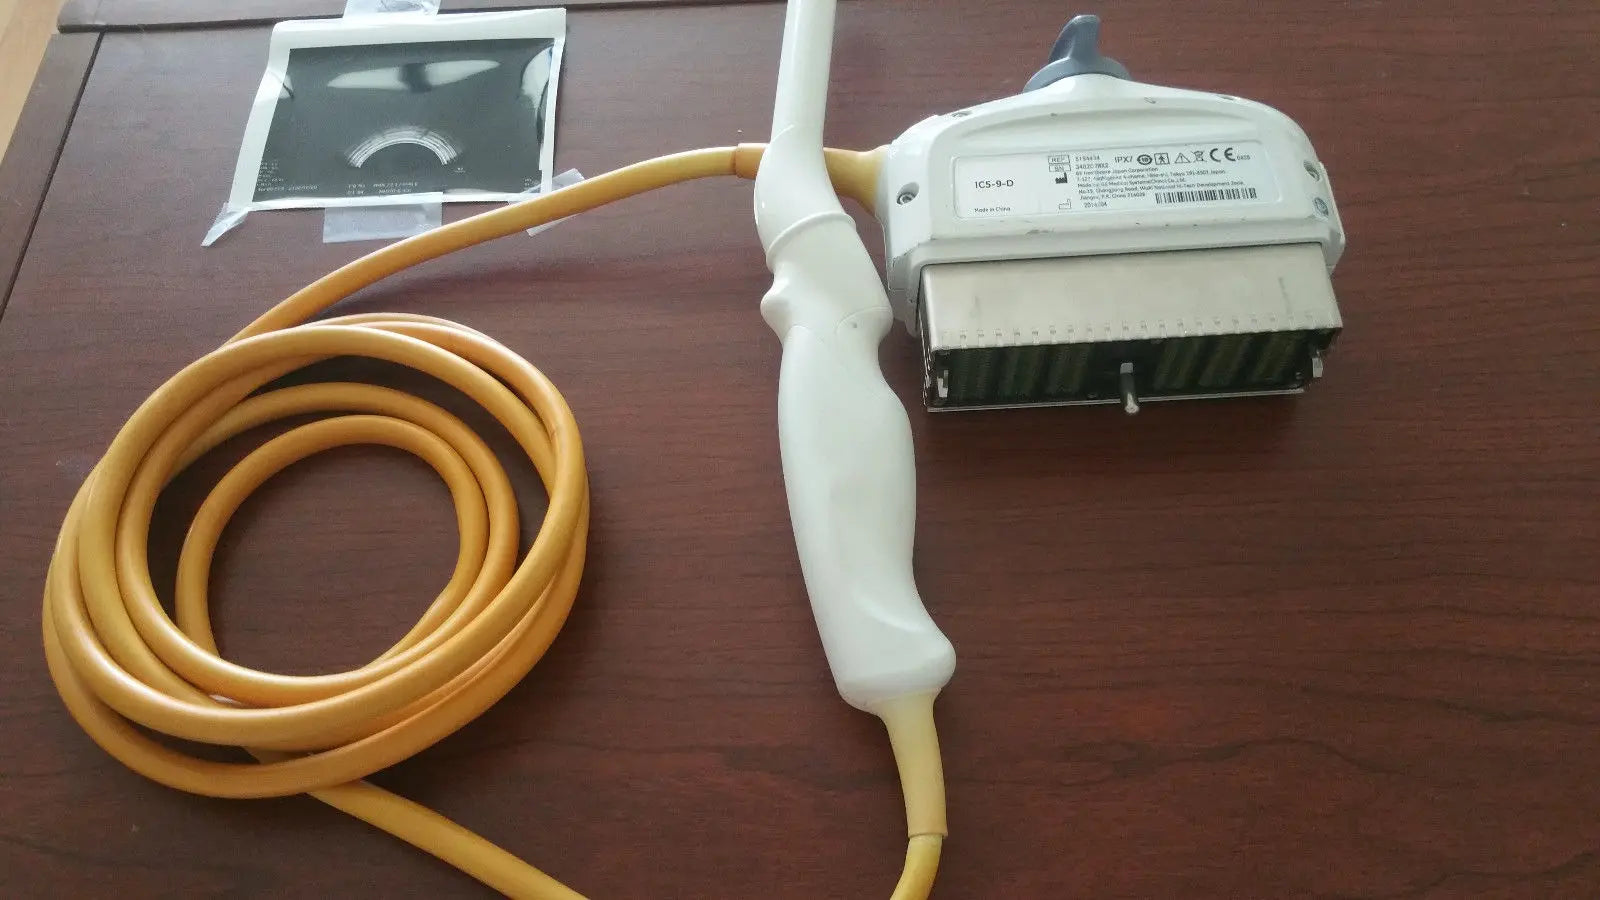 GE IC5-9-D Ultrasound Transducer Probe DIAGNOSTIC ULTRASOUND MACHINES FOR SALE